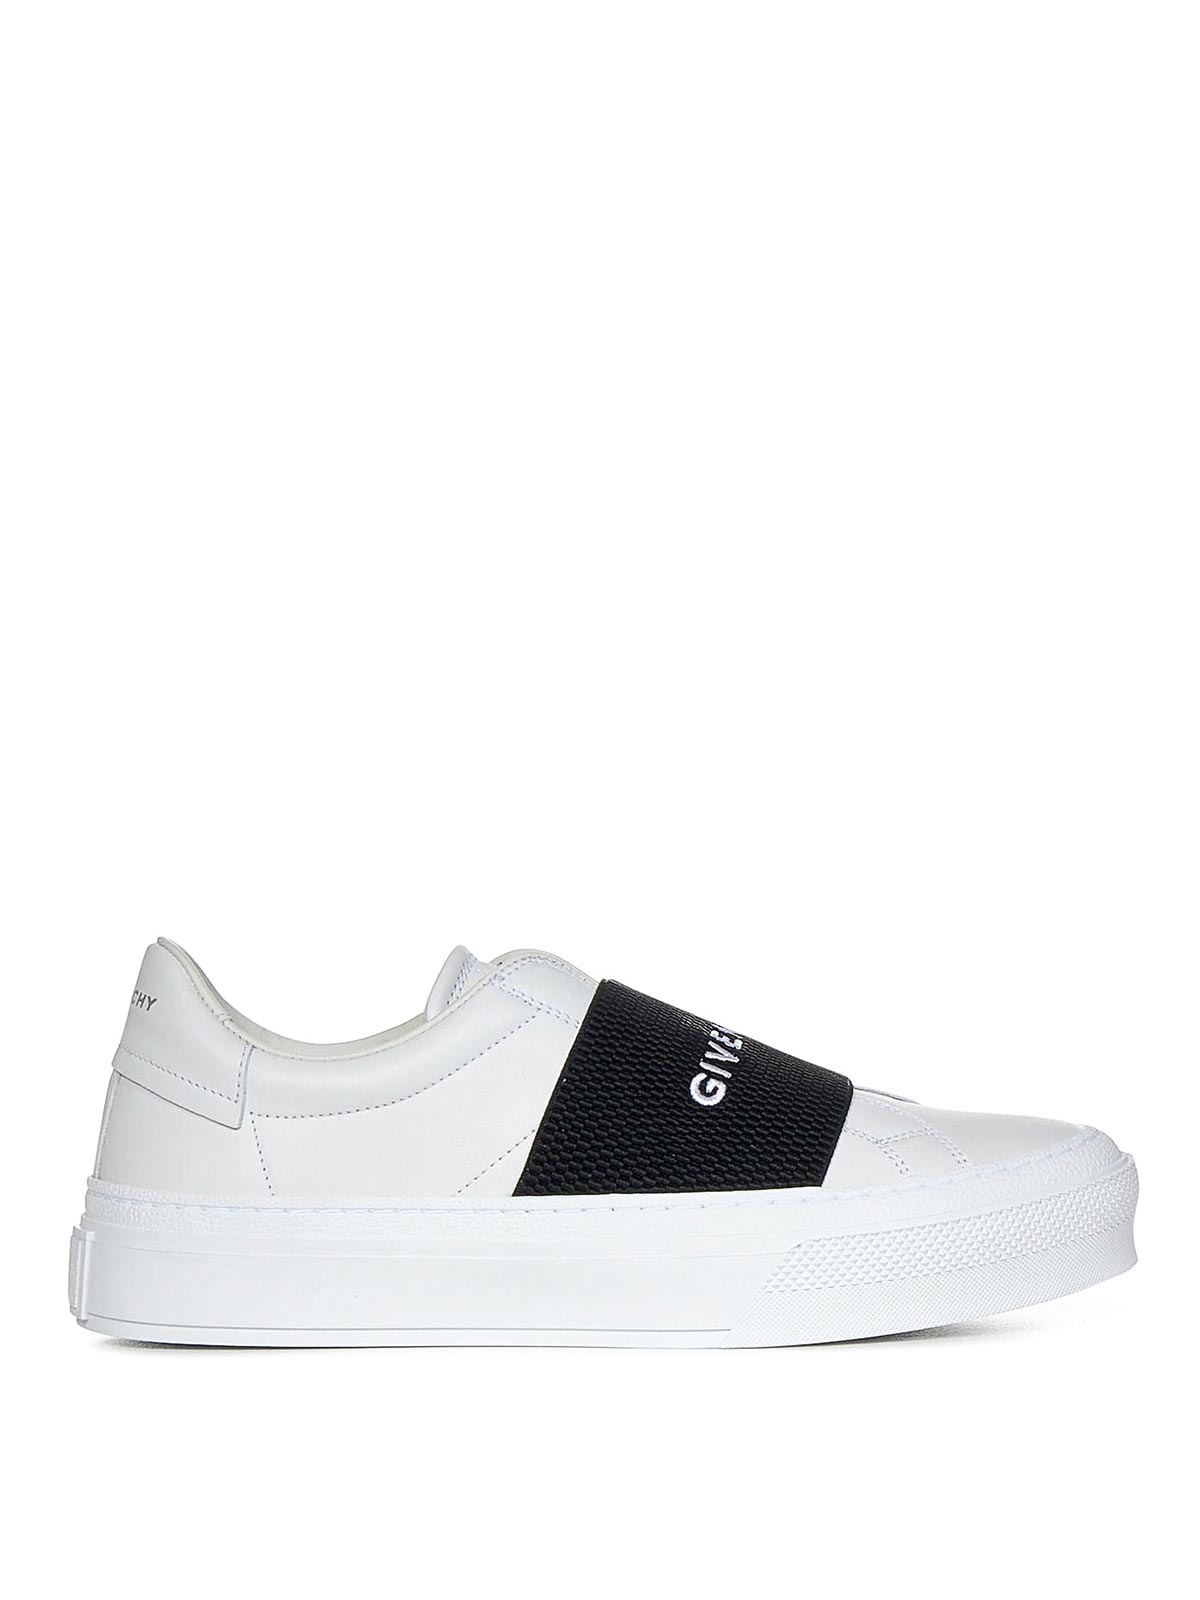 Givenchy White Leather Sneakers With Elastic Band